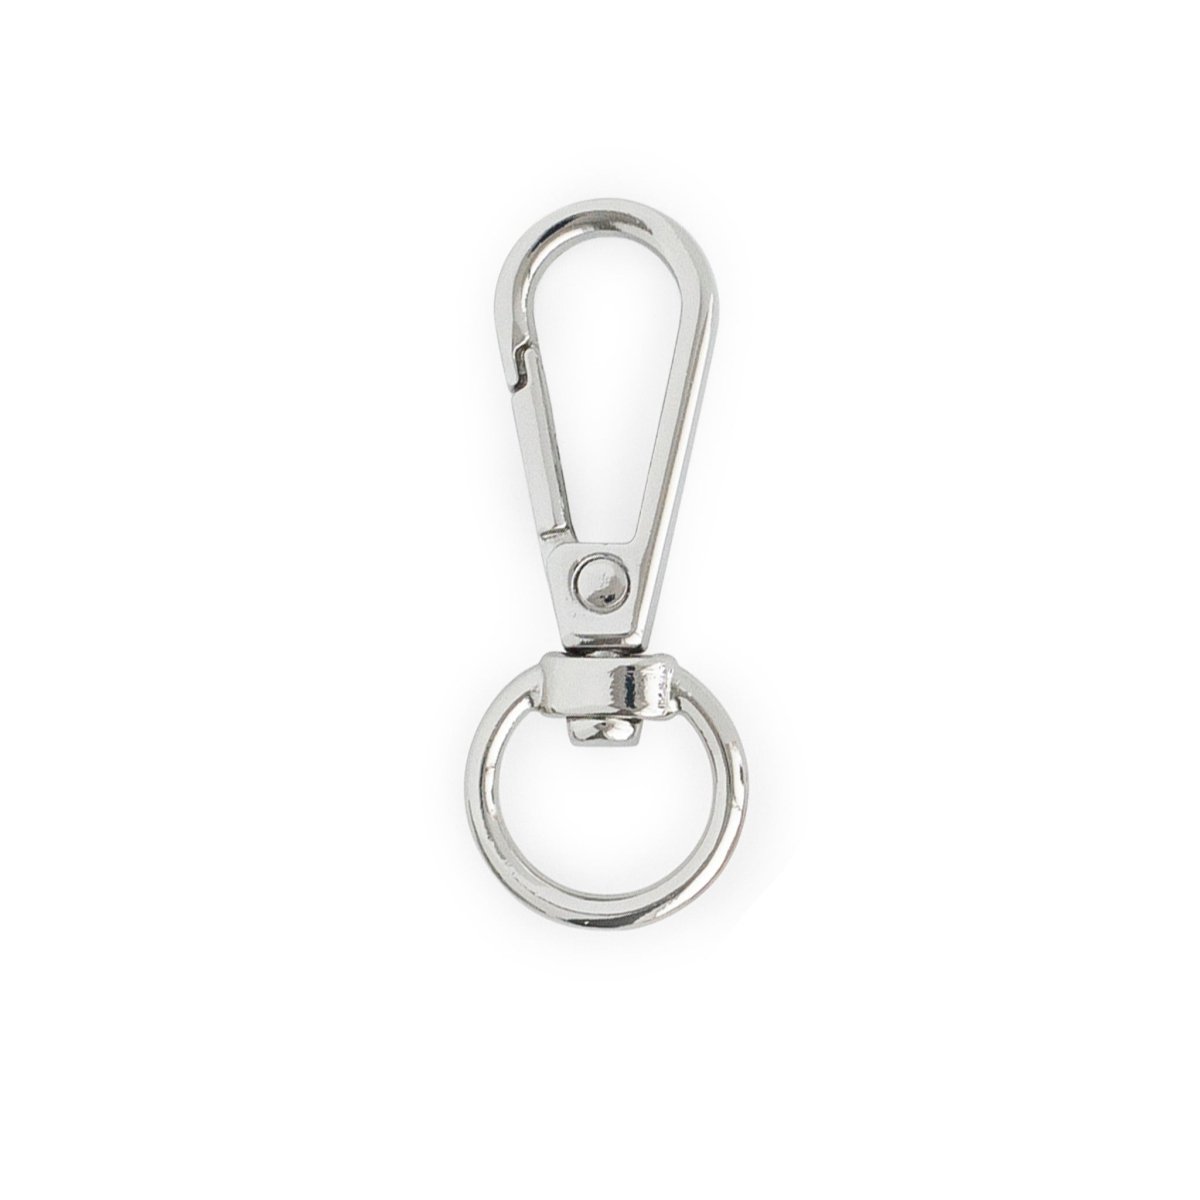 Lanyards Premium J Hook Clips Silver from Cara & Co Craft Supply